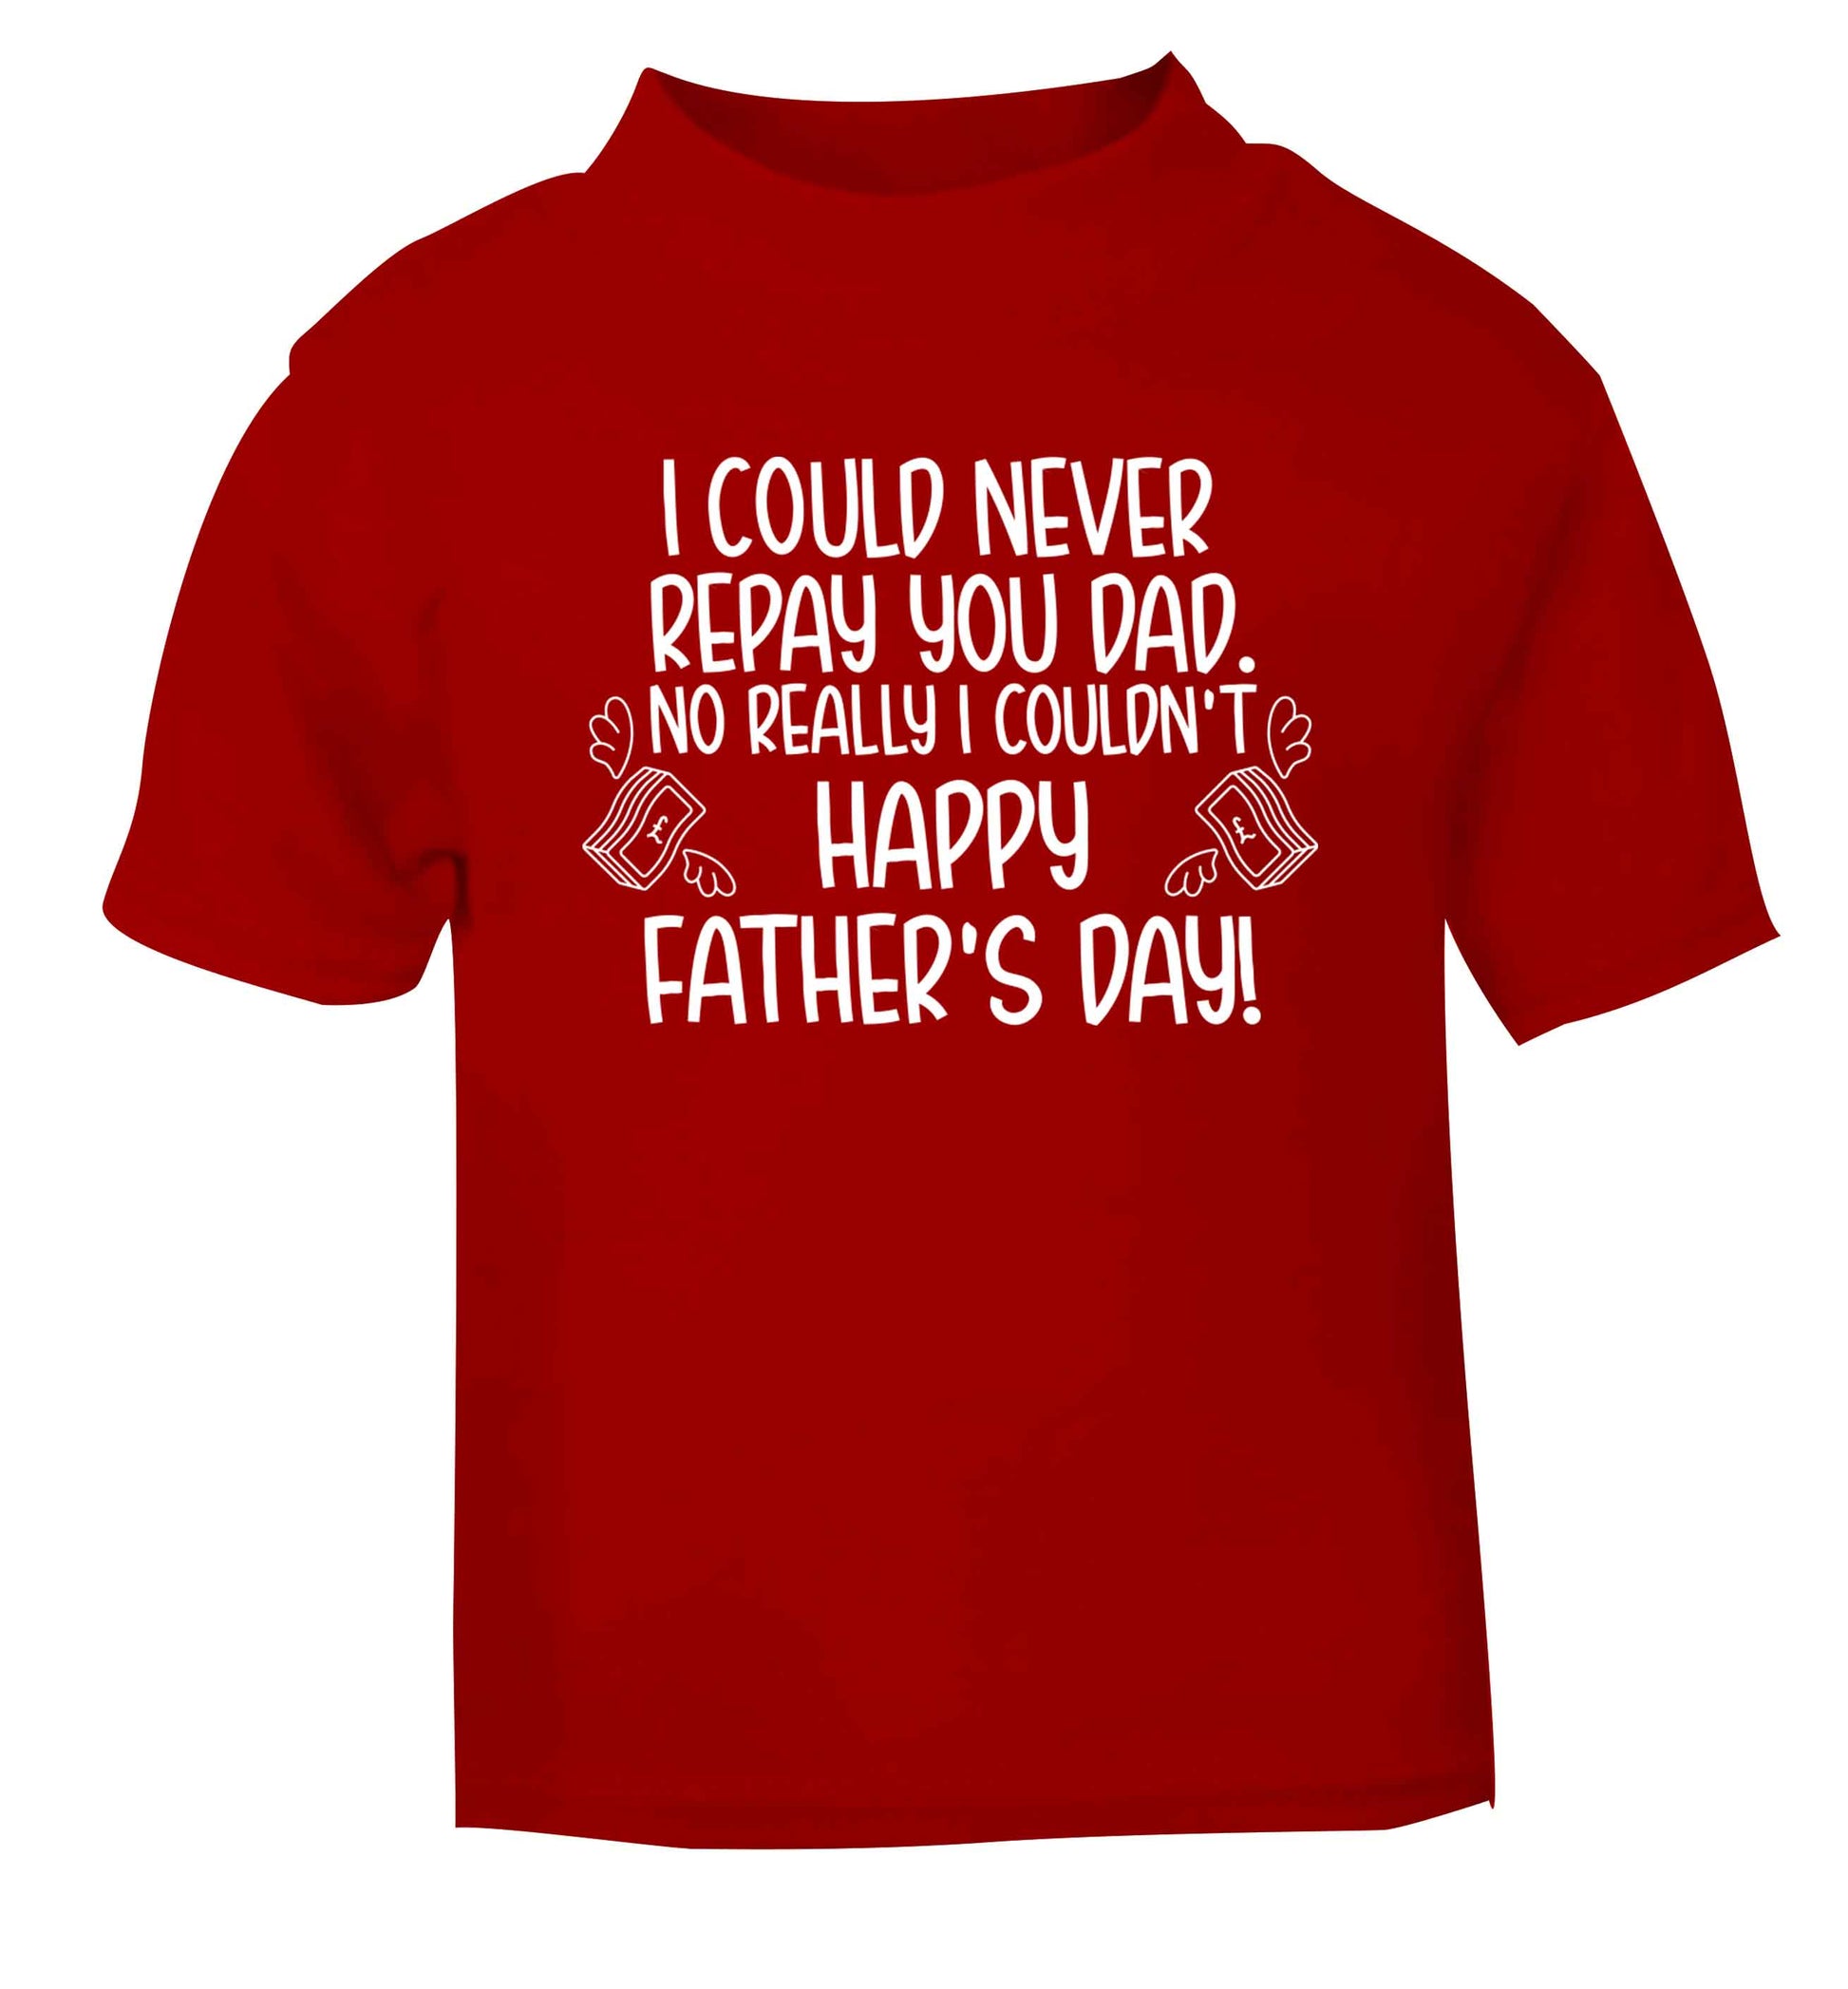 I could never repay you dad. No I really couldn't happy Father's day! red baby toddler Tshirt 2 Years